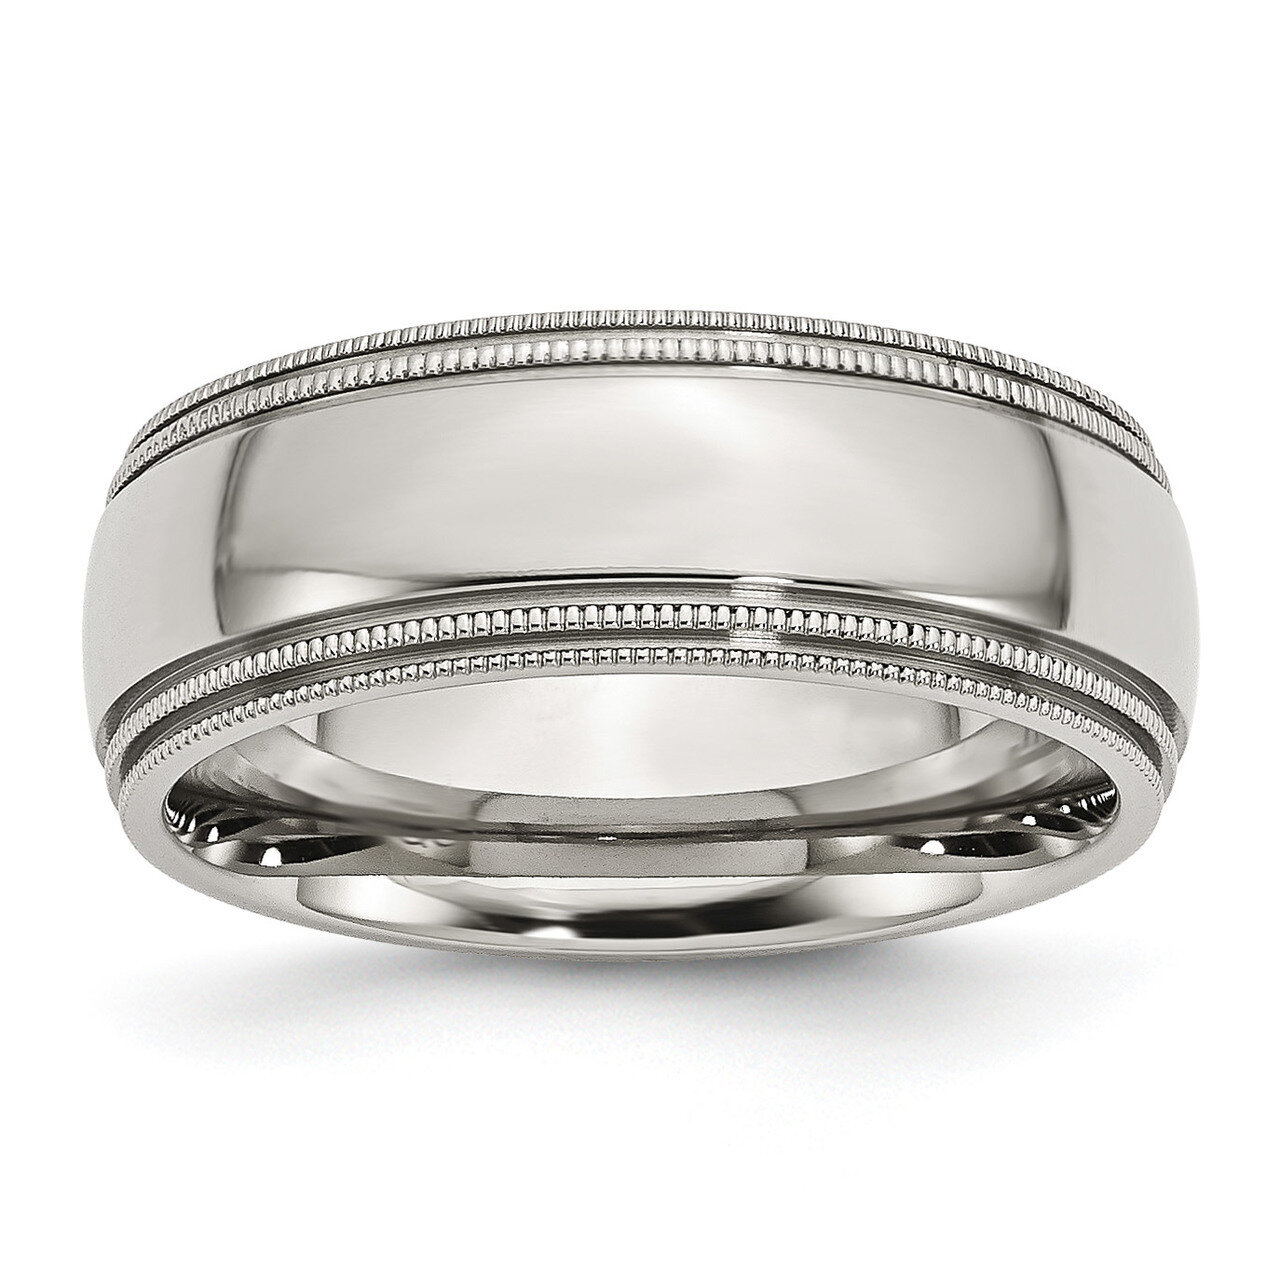 Beaded 8mm Polished Band Stainless Steel Grooved SR96